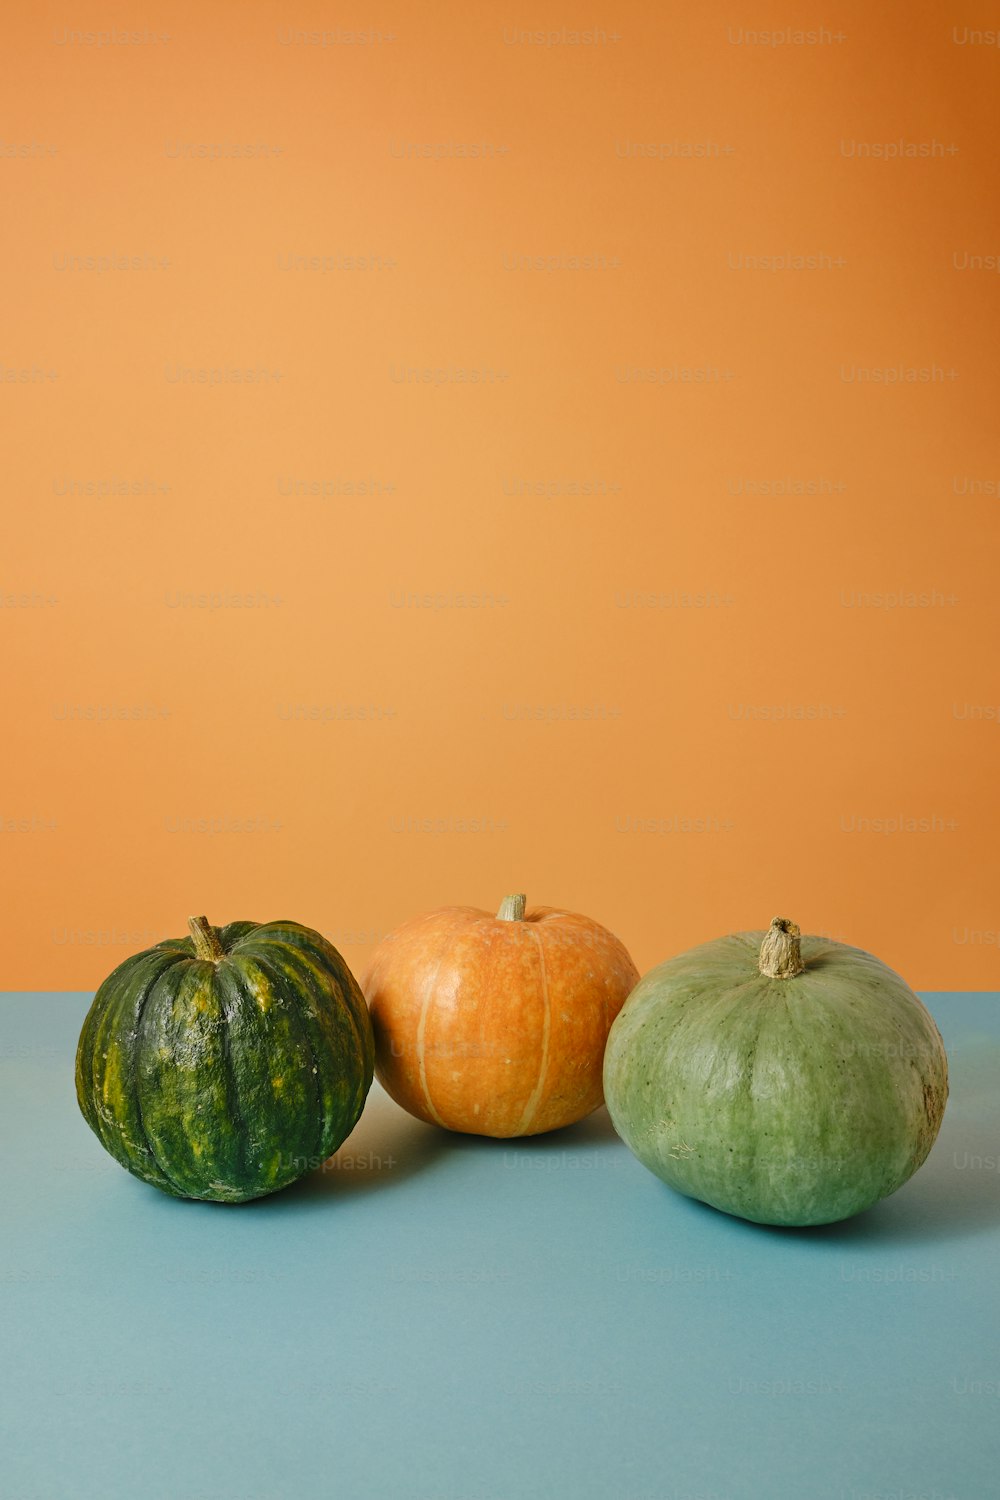 three different types of vegetables on a blue surface